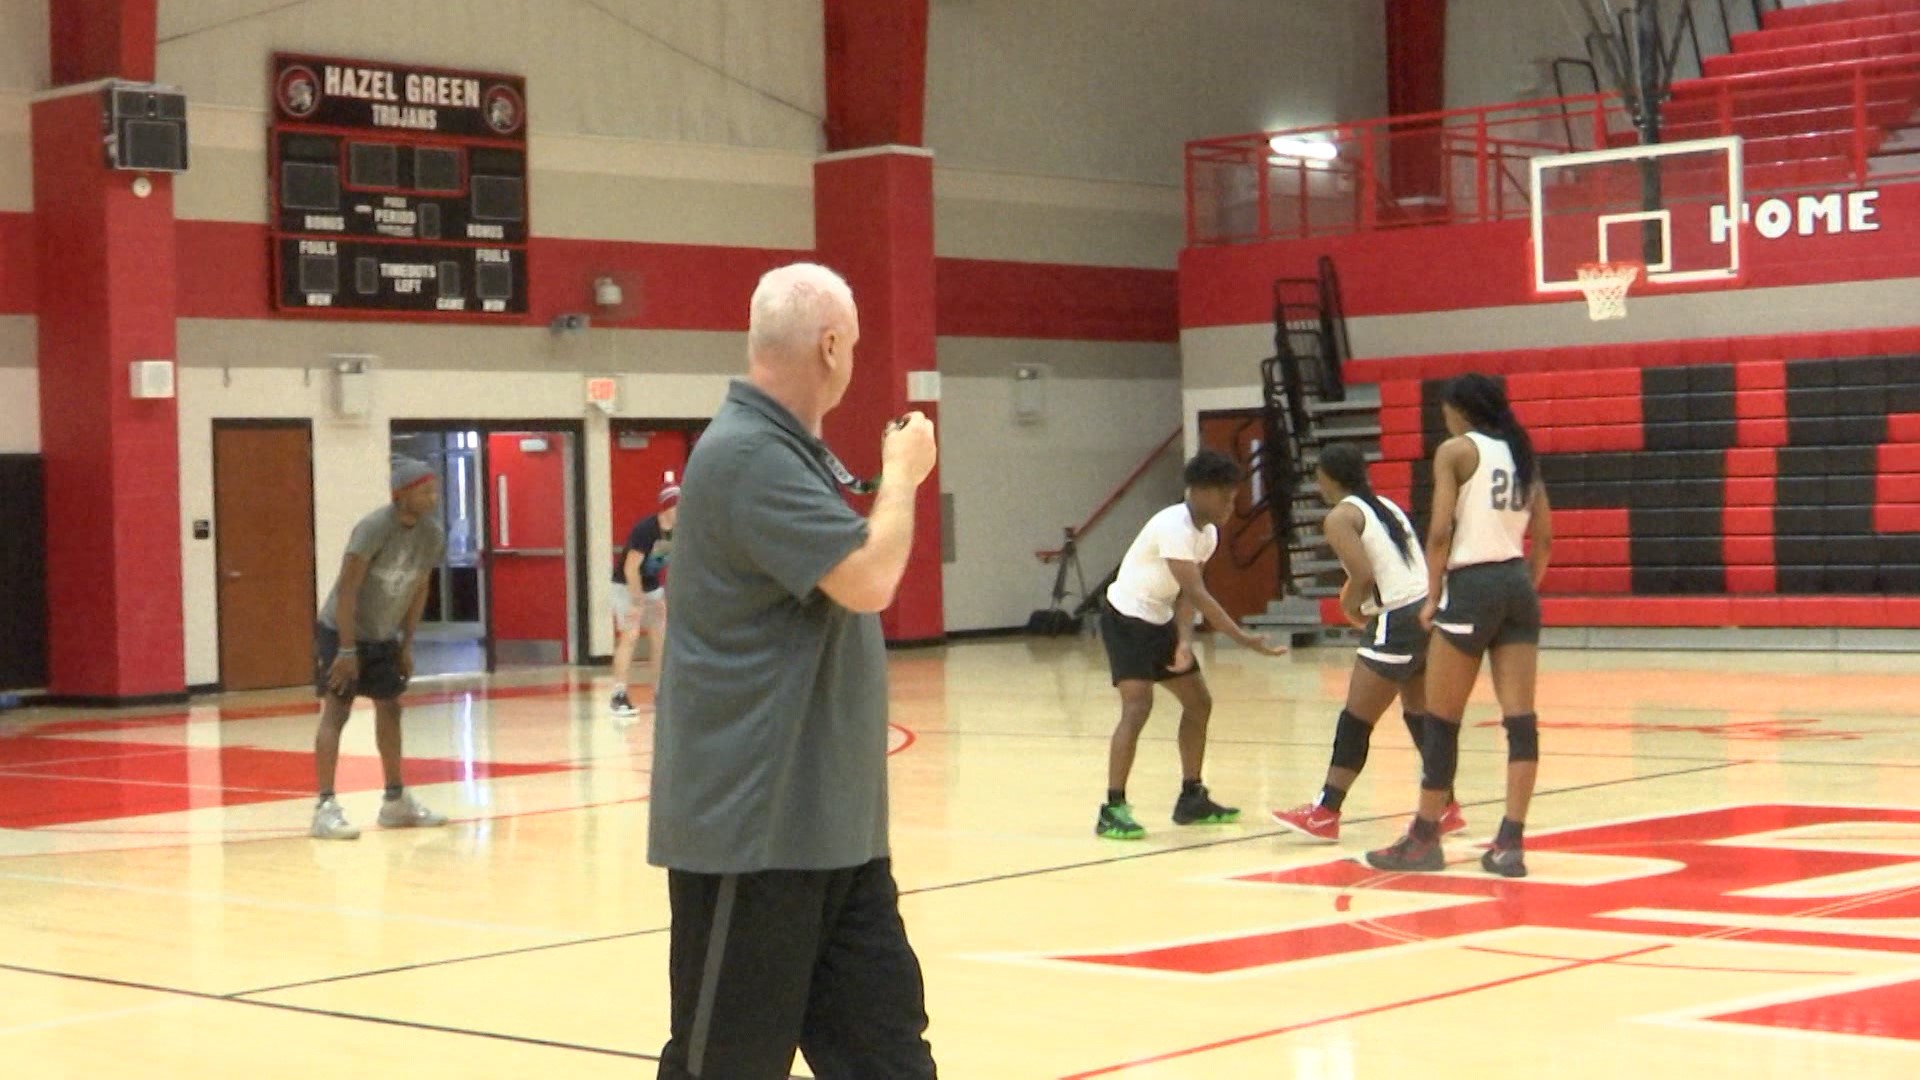 Tim Miller & the Hazel Green Lady Trojans have their sights set on winning their 5th straight AHSAA State Championship in basketball.